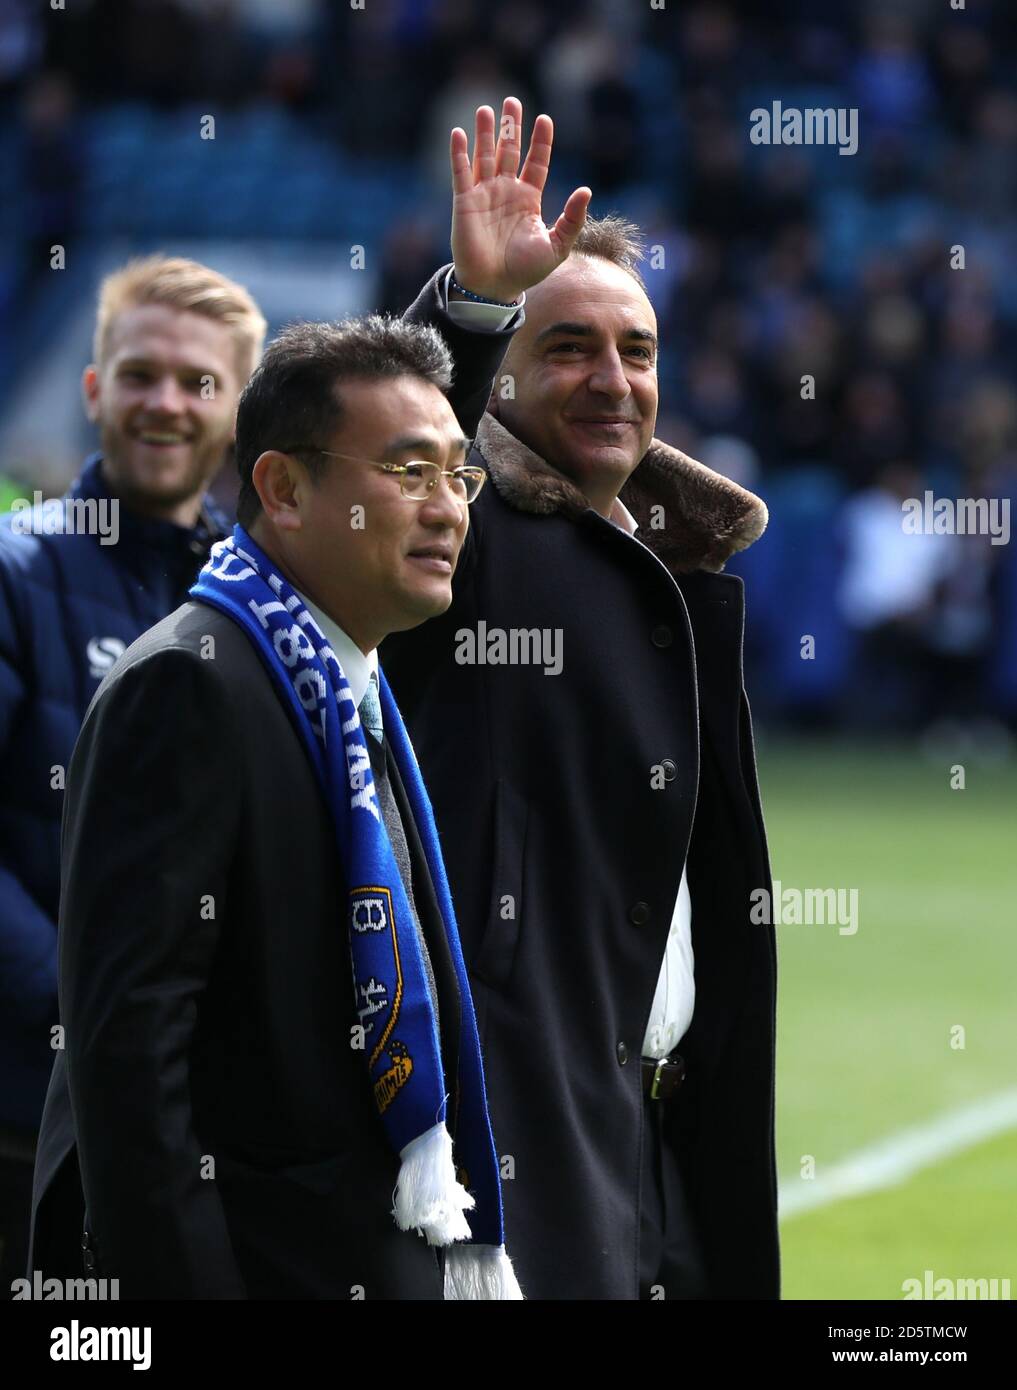 Sheffield Wednesday manager Carlos Carvalhal (right) and owner Dejphon Chansiri walk the pitch after the final whistle Stock Photo